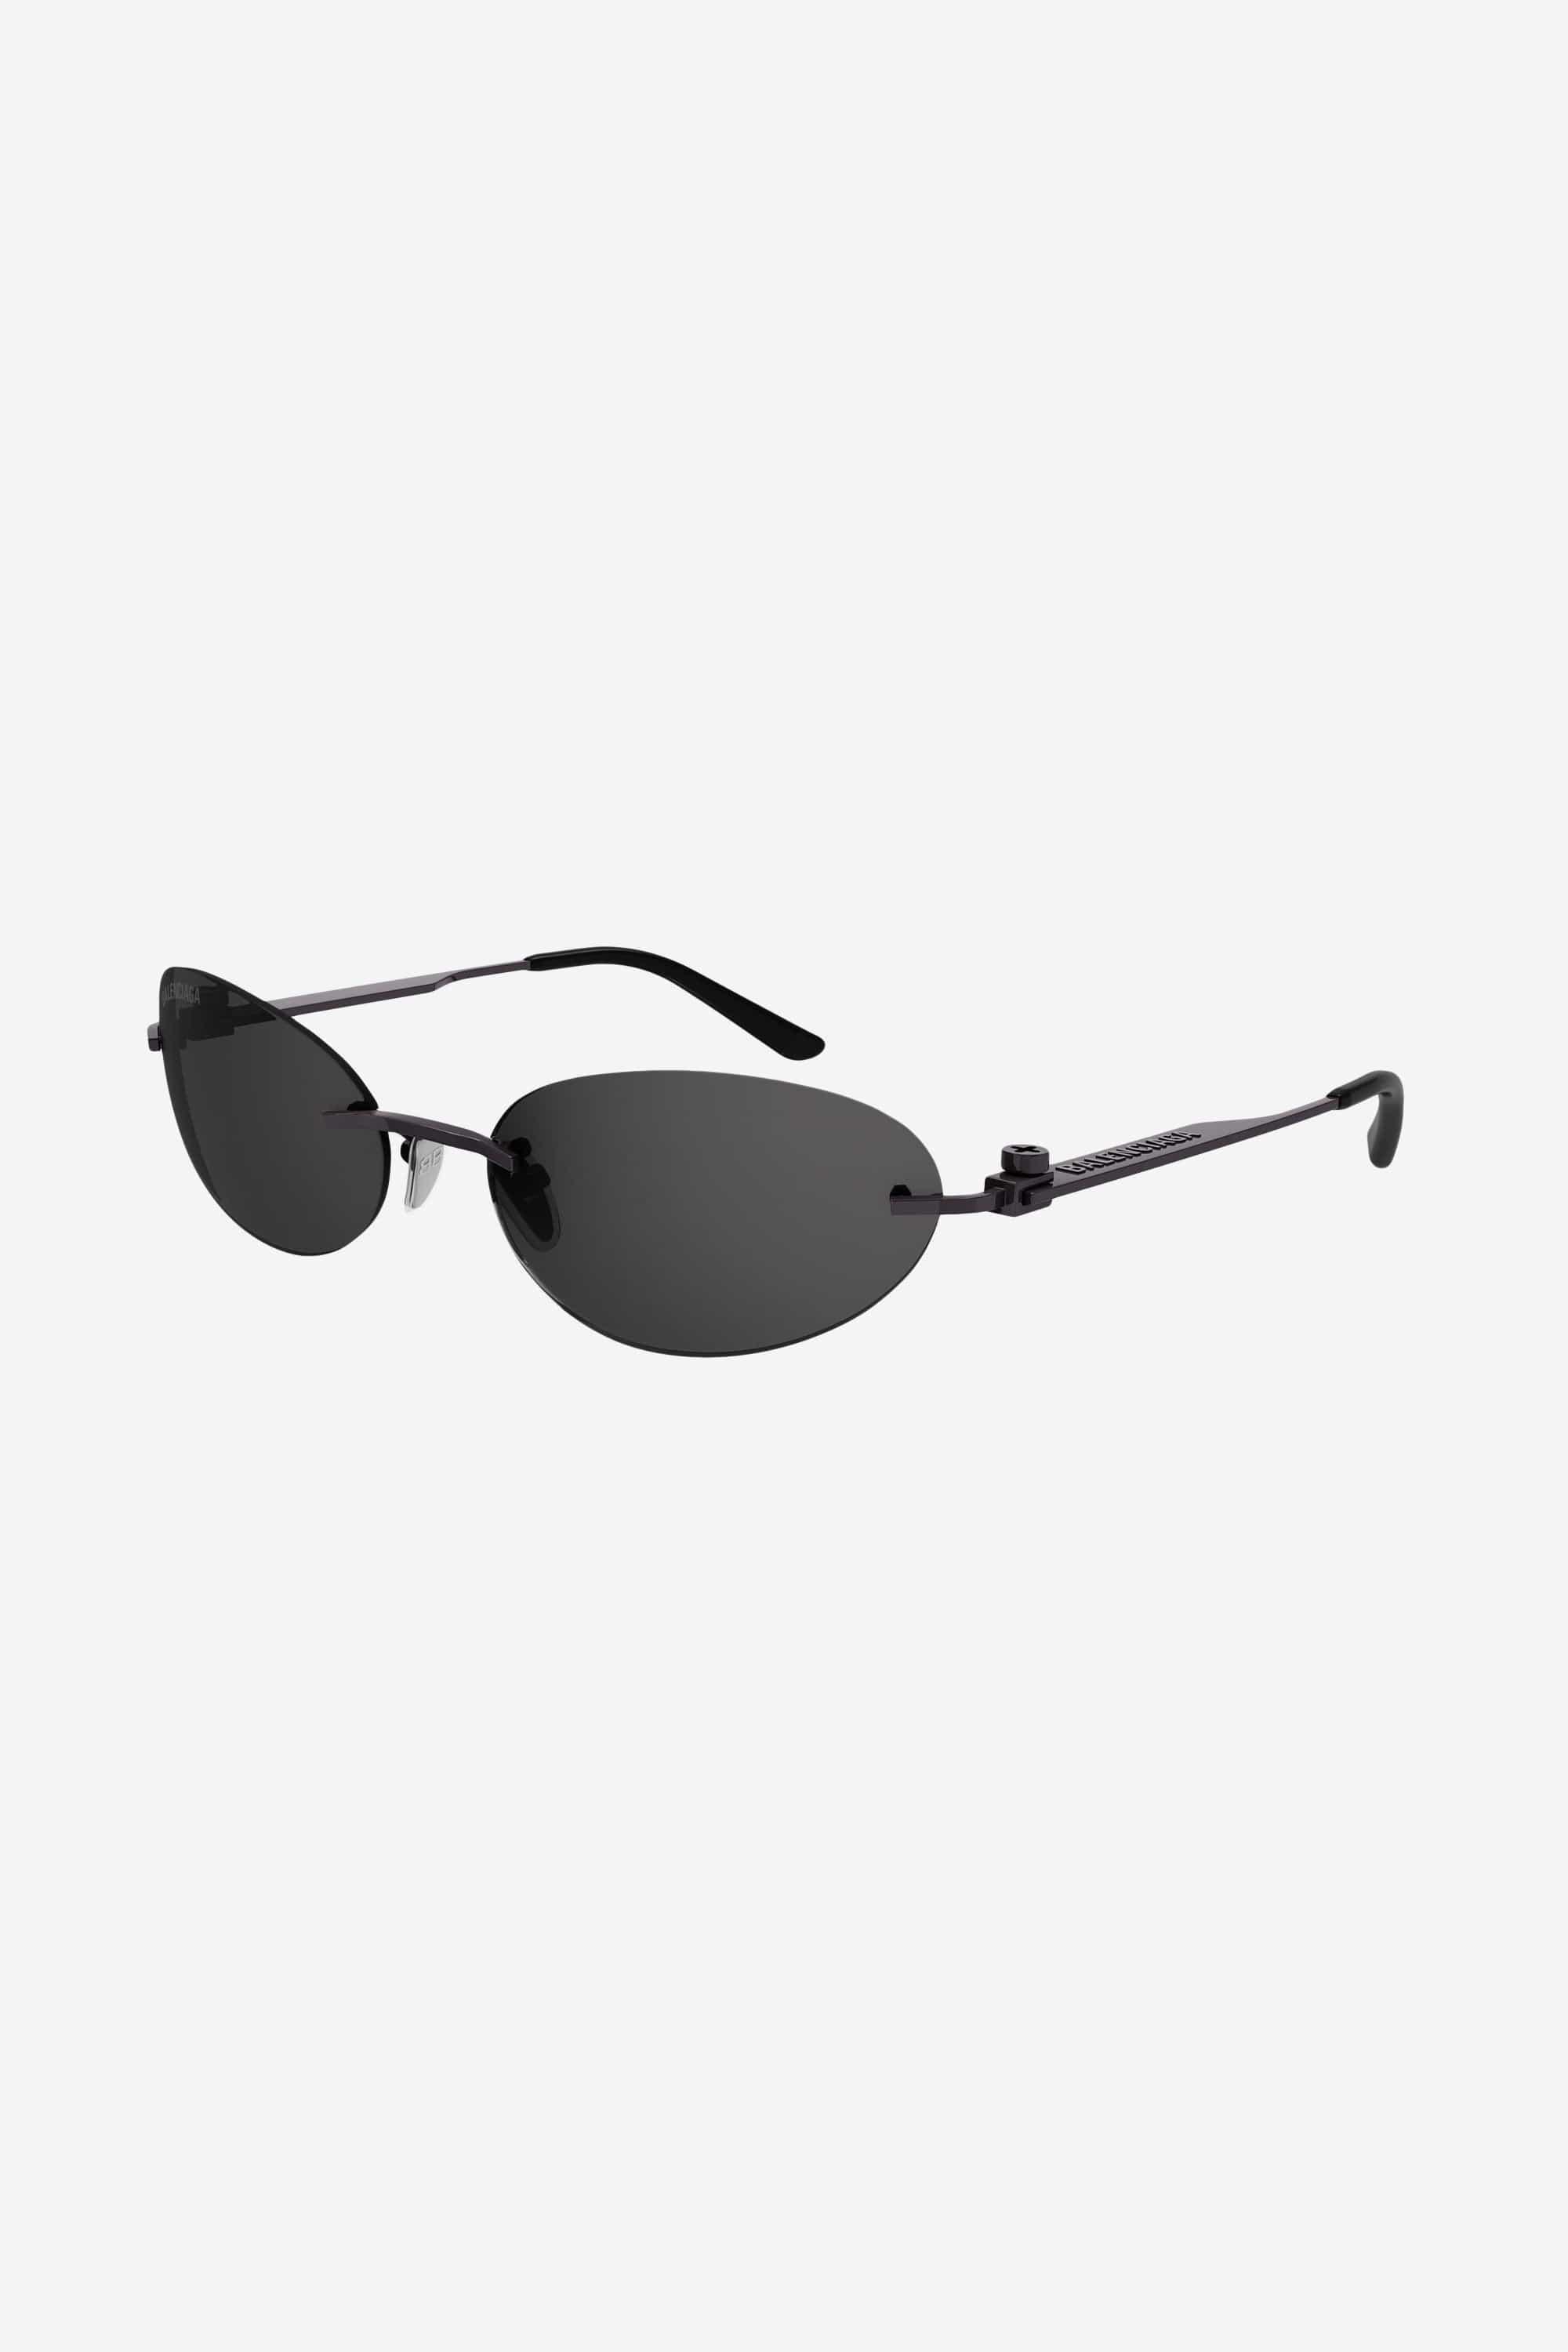 Balenciaga Available 27th March- Oval Metal Black Sunglasses | Lyst